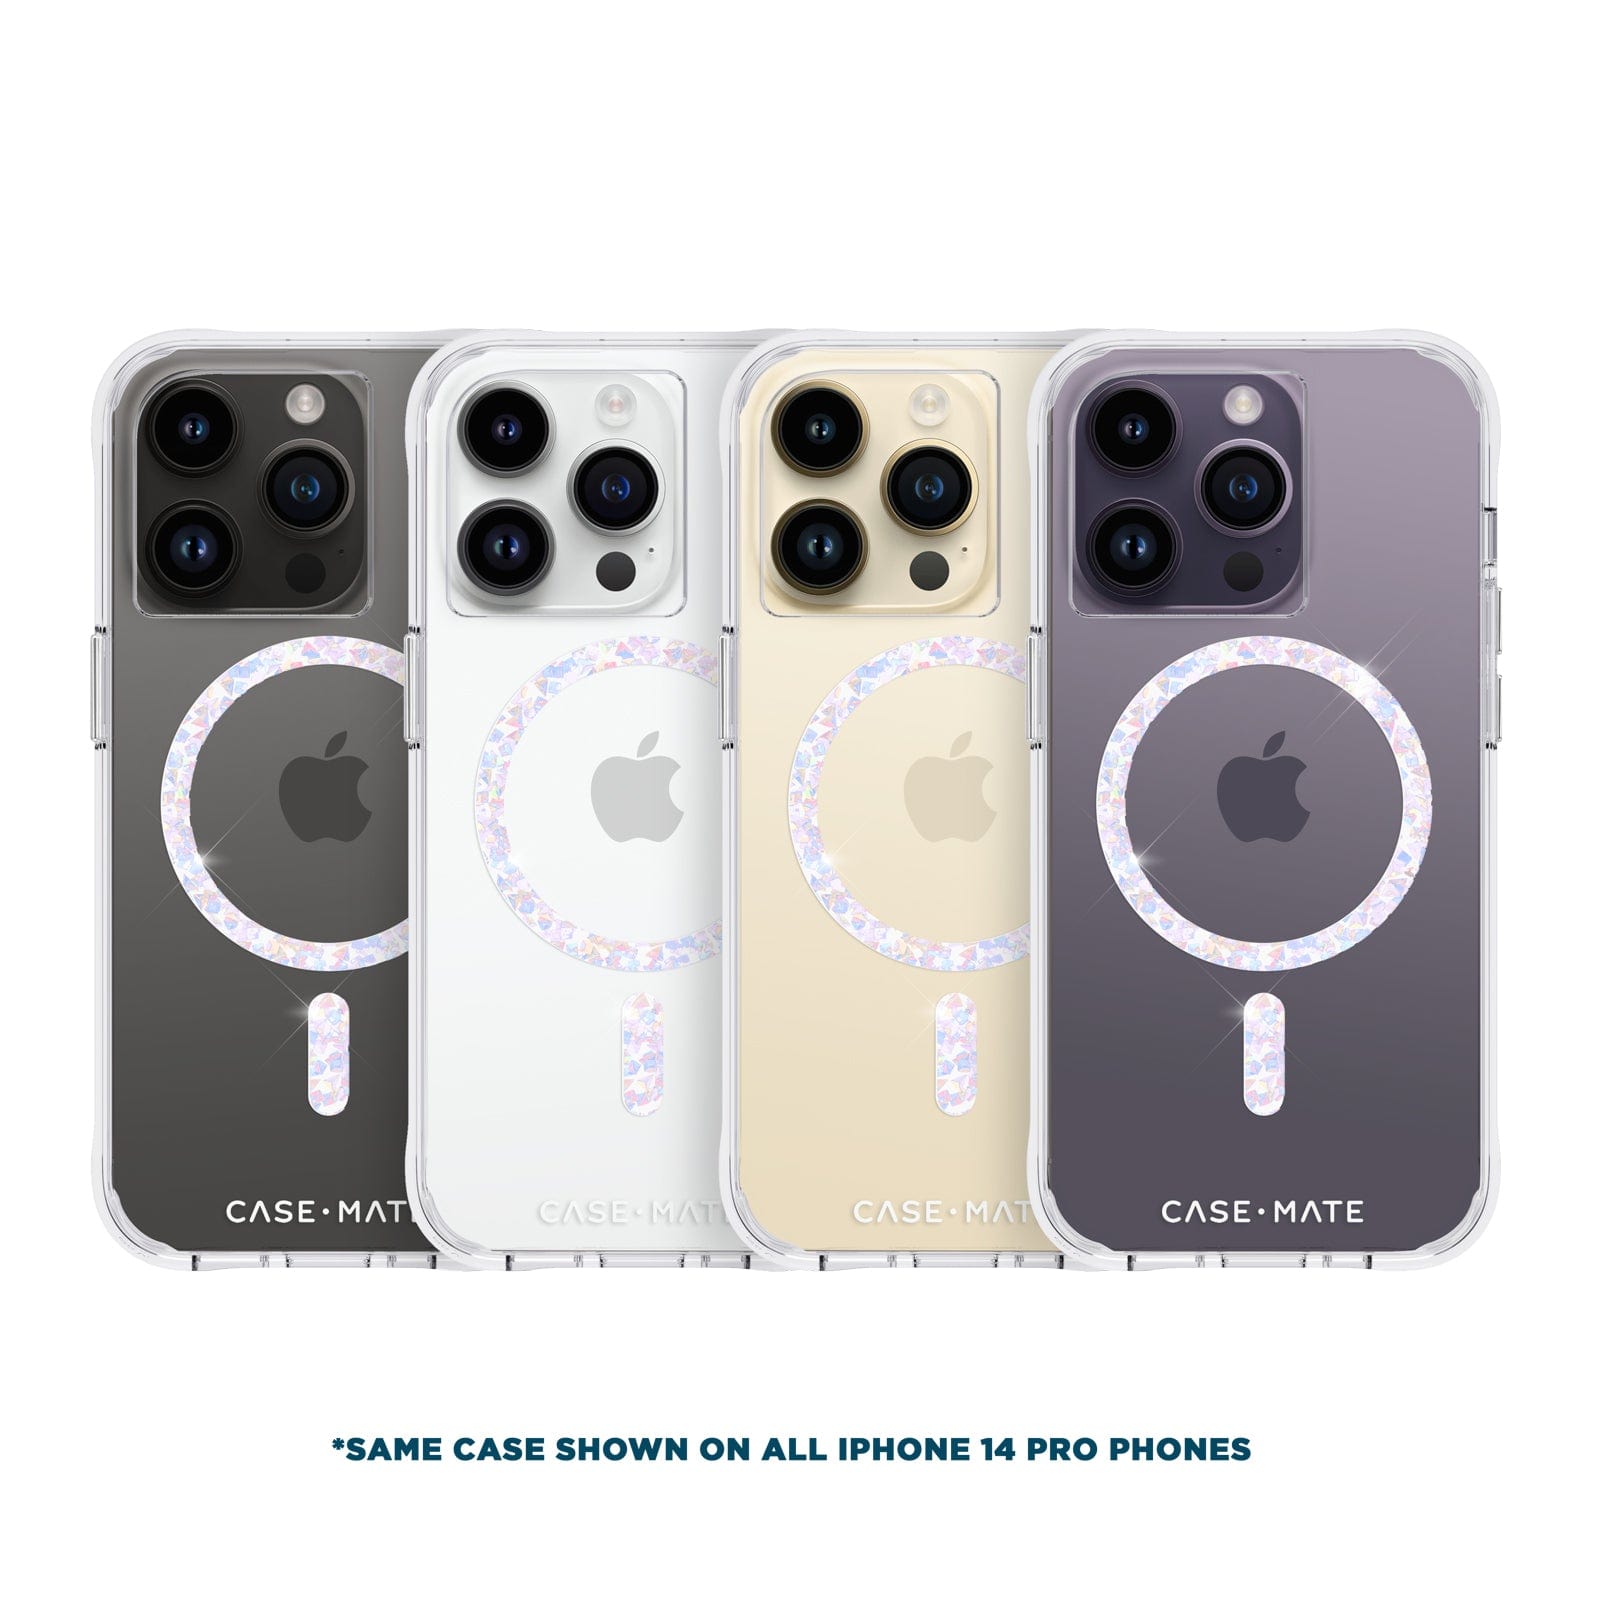 *SAME CASE SHOWN ON ALL IPHONE 14 PRO PHONES